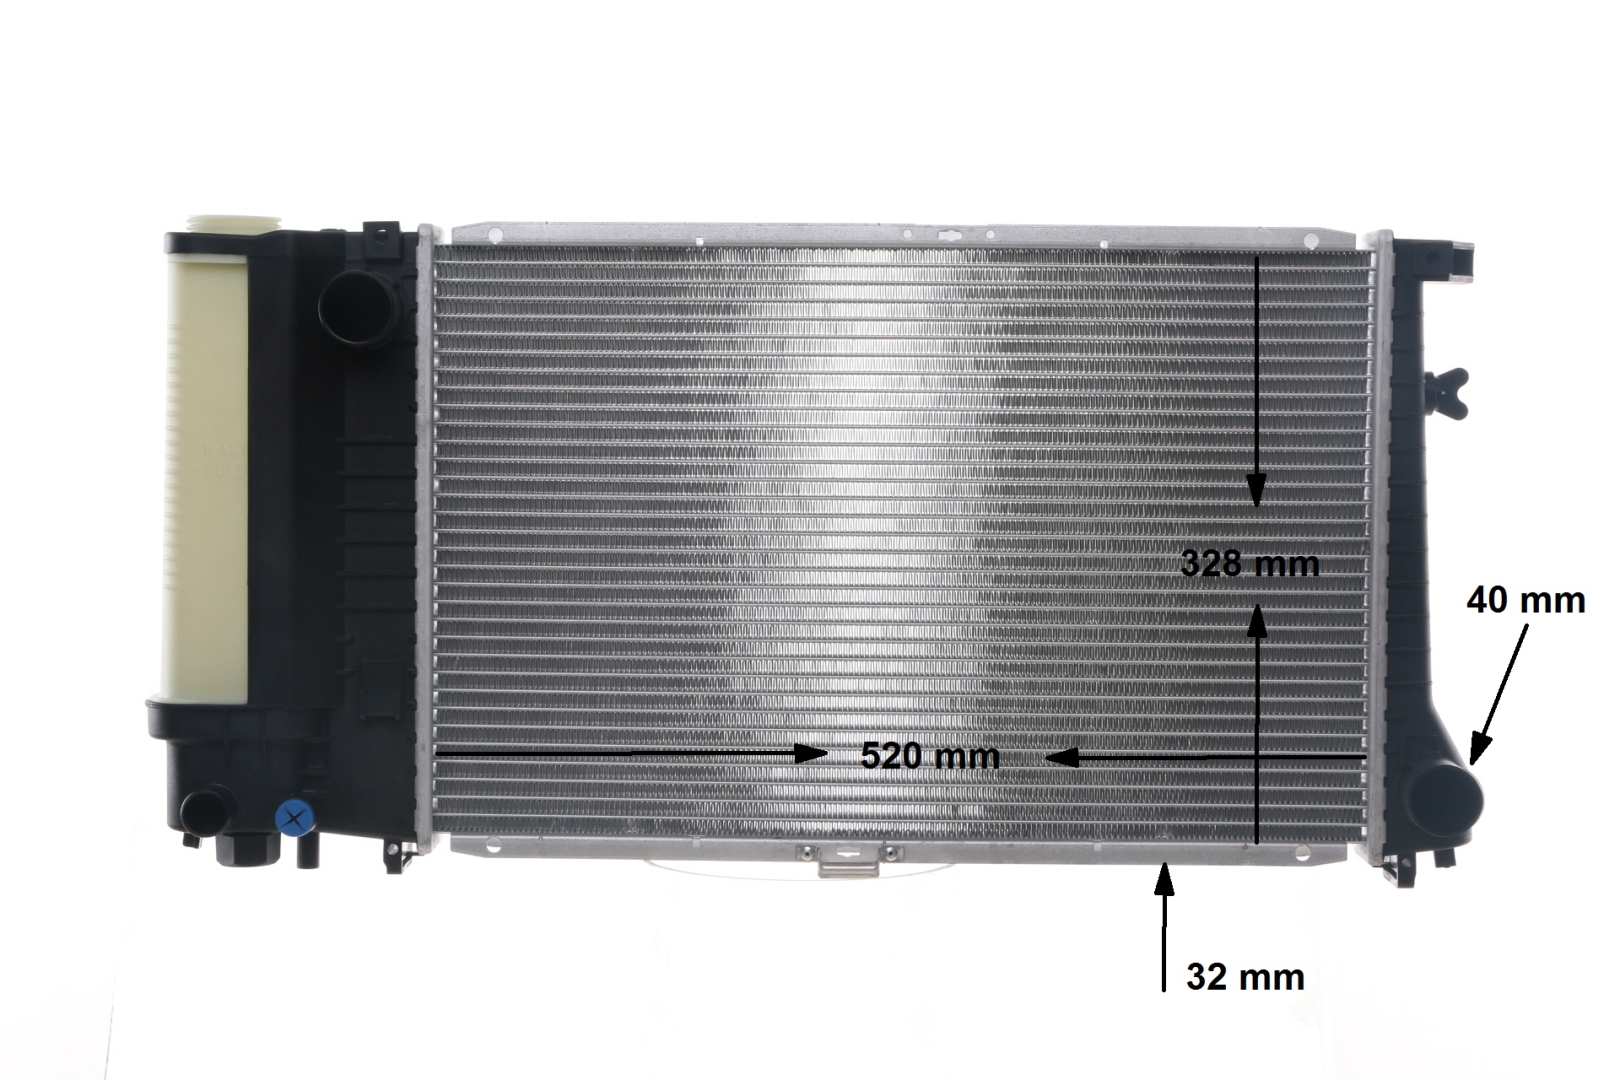 MAHLE ORIGINAL CR 482 000S Engine radiator for vehicles without air conditioning, 520 x 322 x 32 mm, Manual Transmission, Brazed cooling fins